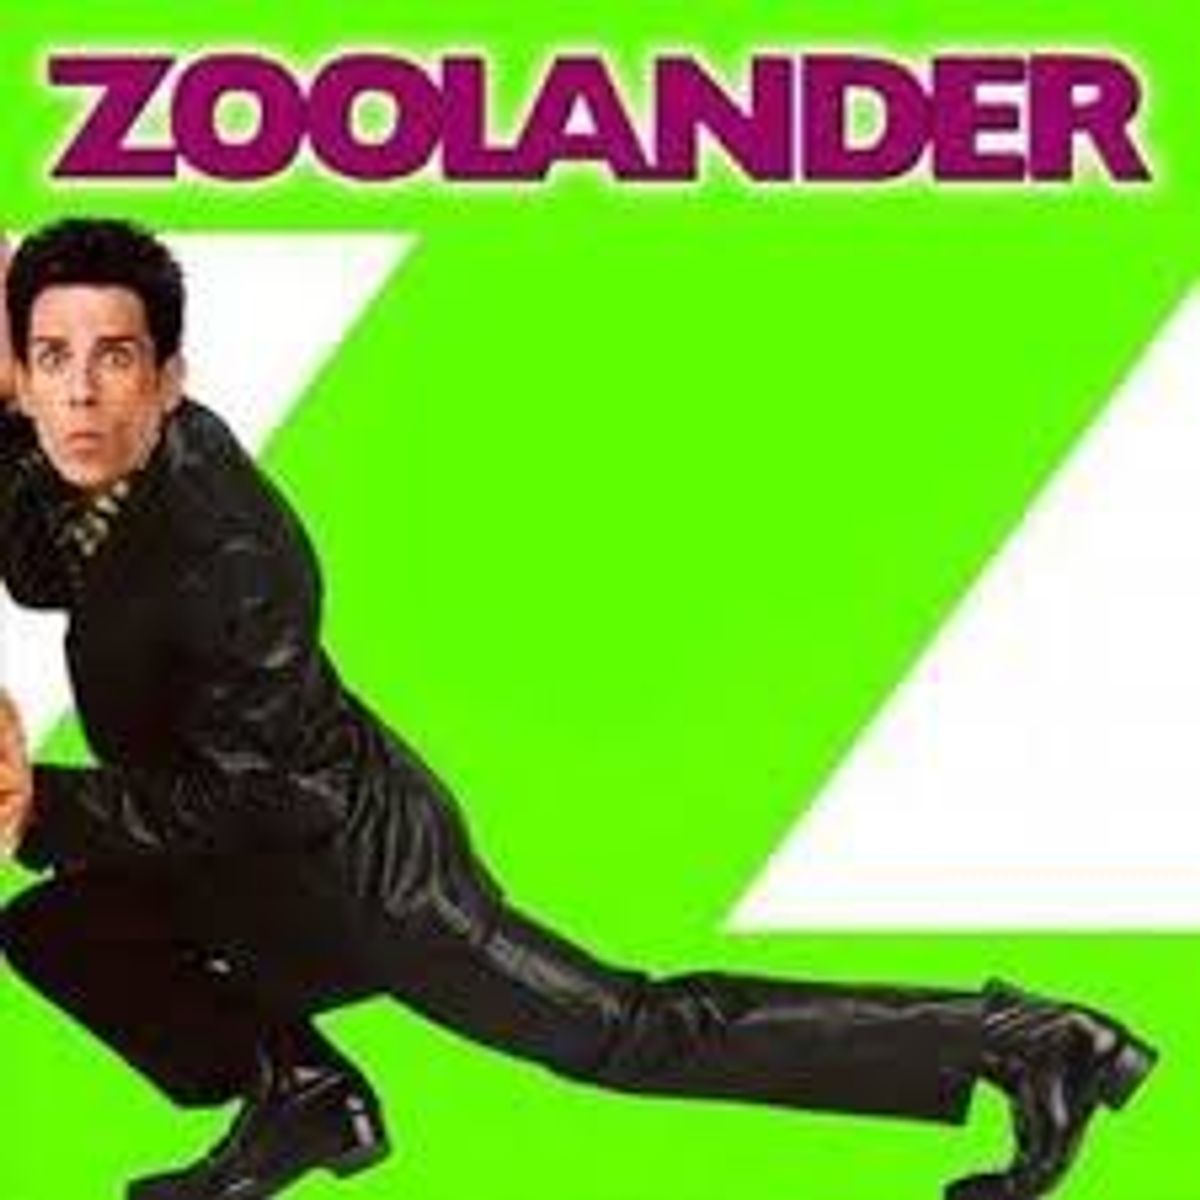 12 Zoolander Scenes that have Impacted Society